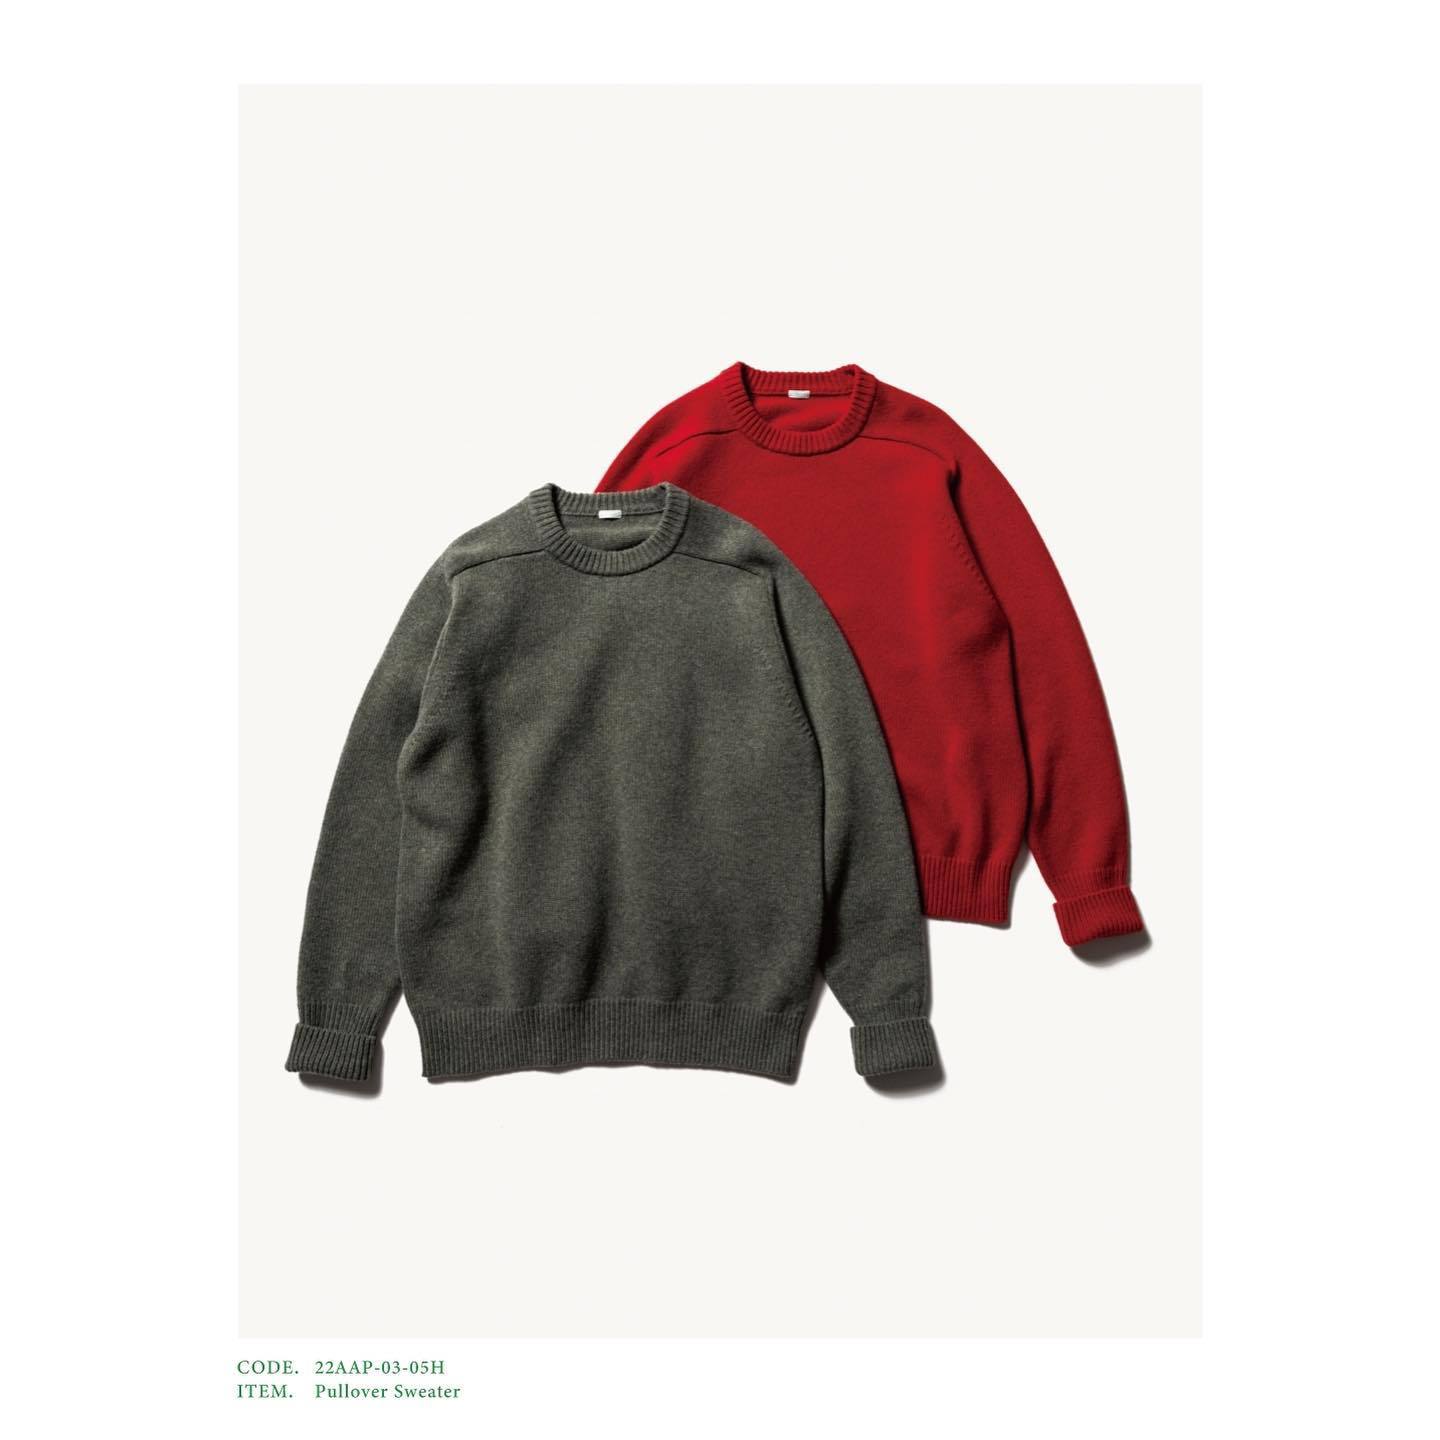 A.PRESSE(ア プレッセ)/ Pullover Sweater -Red,Green- #22AAP-03-05H(1)